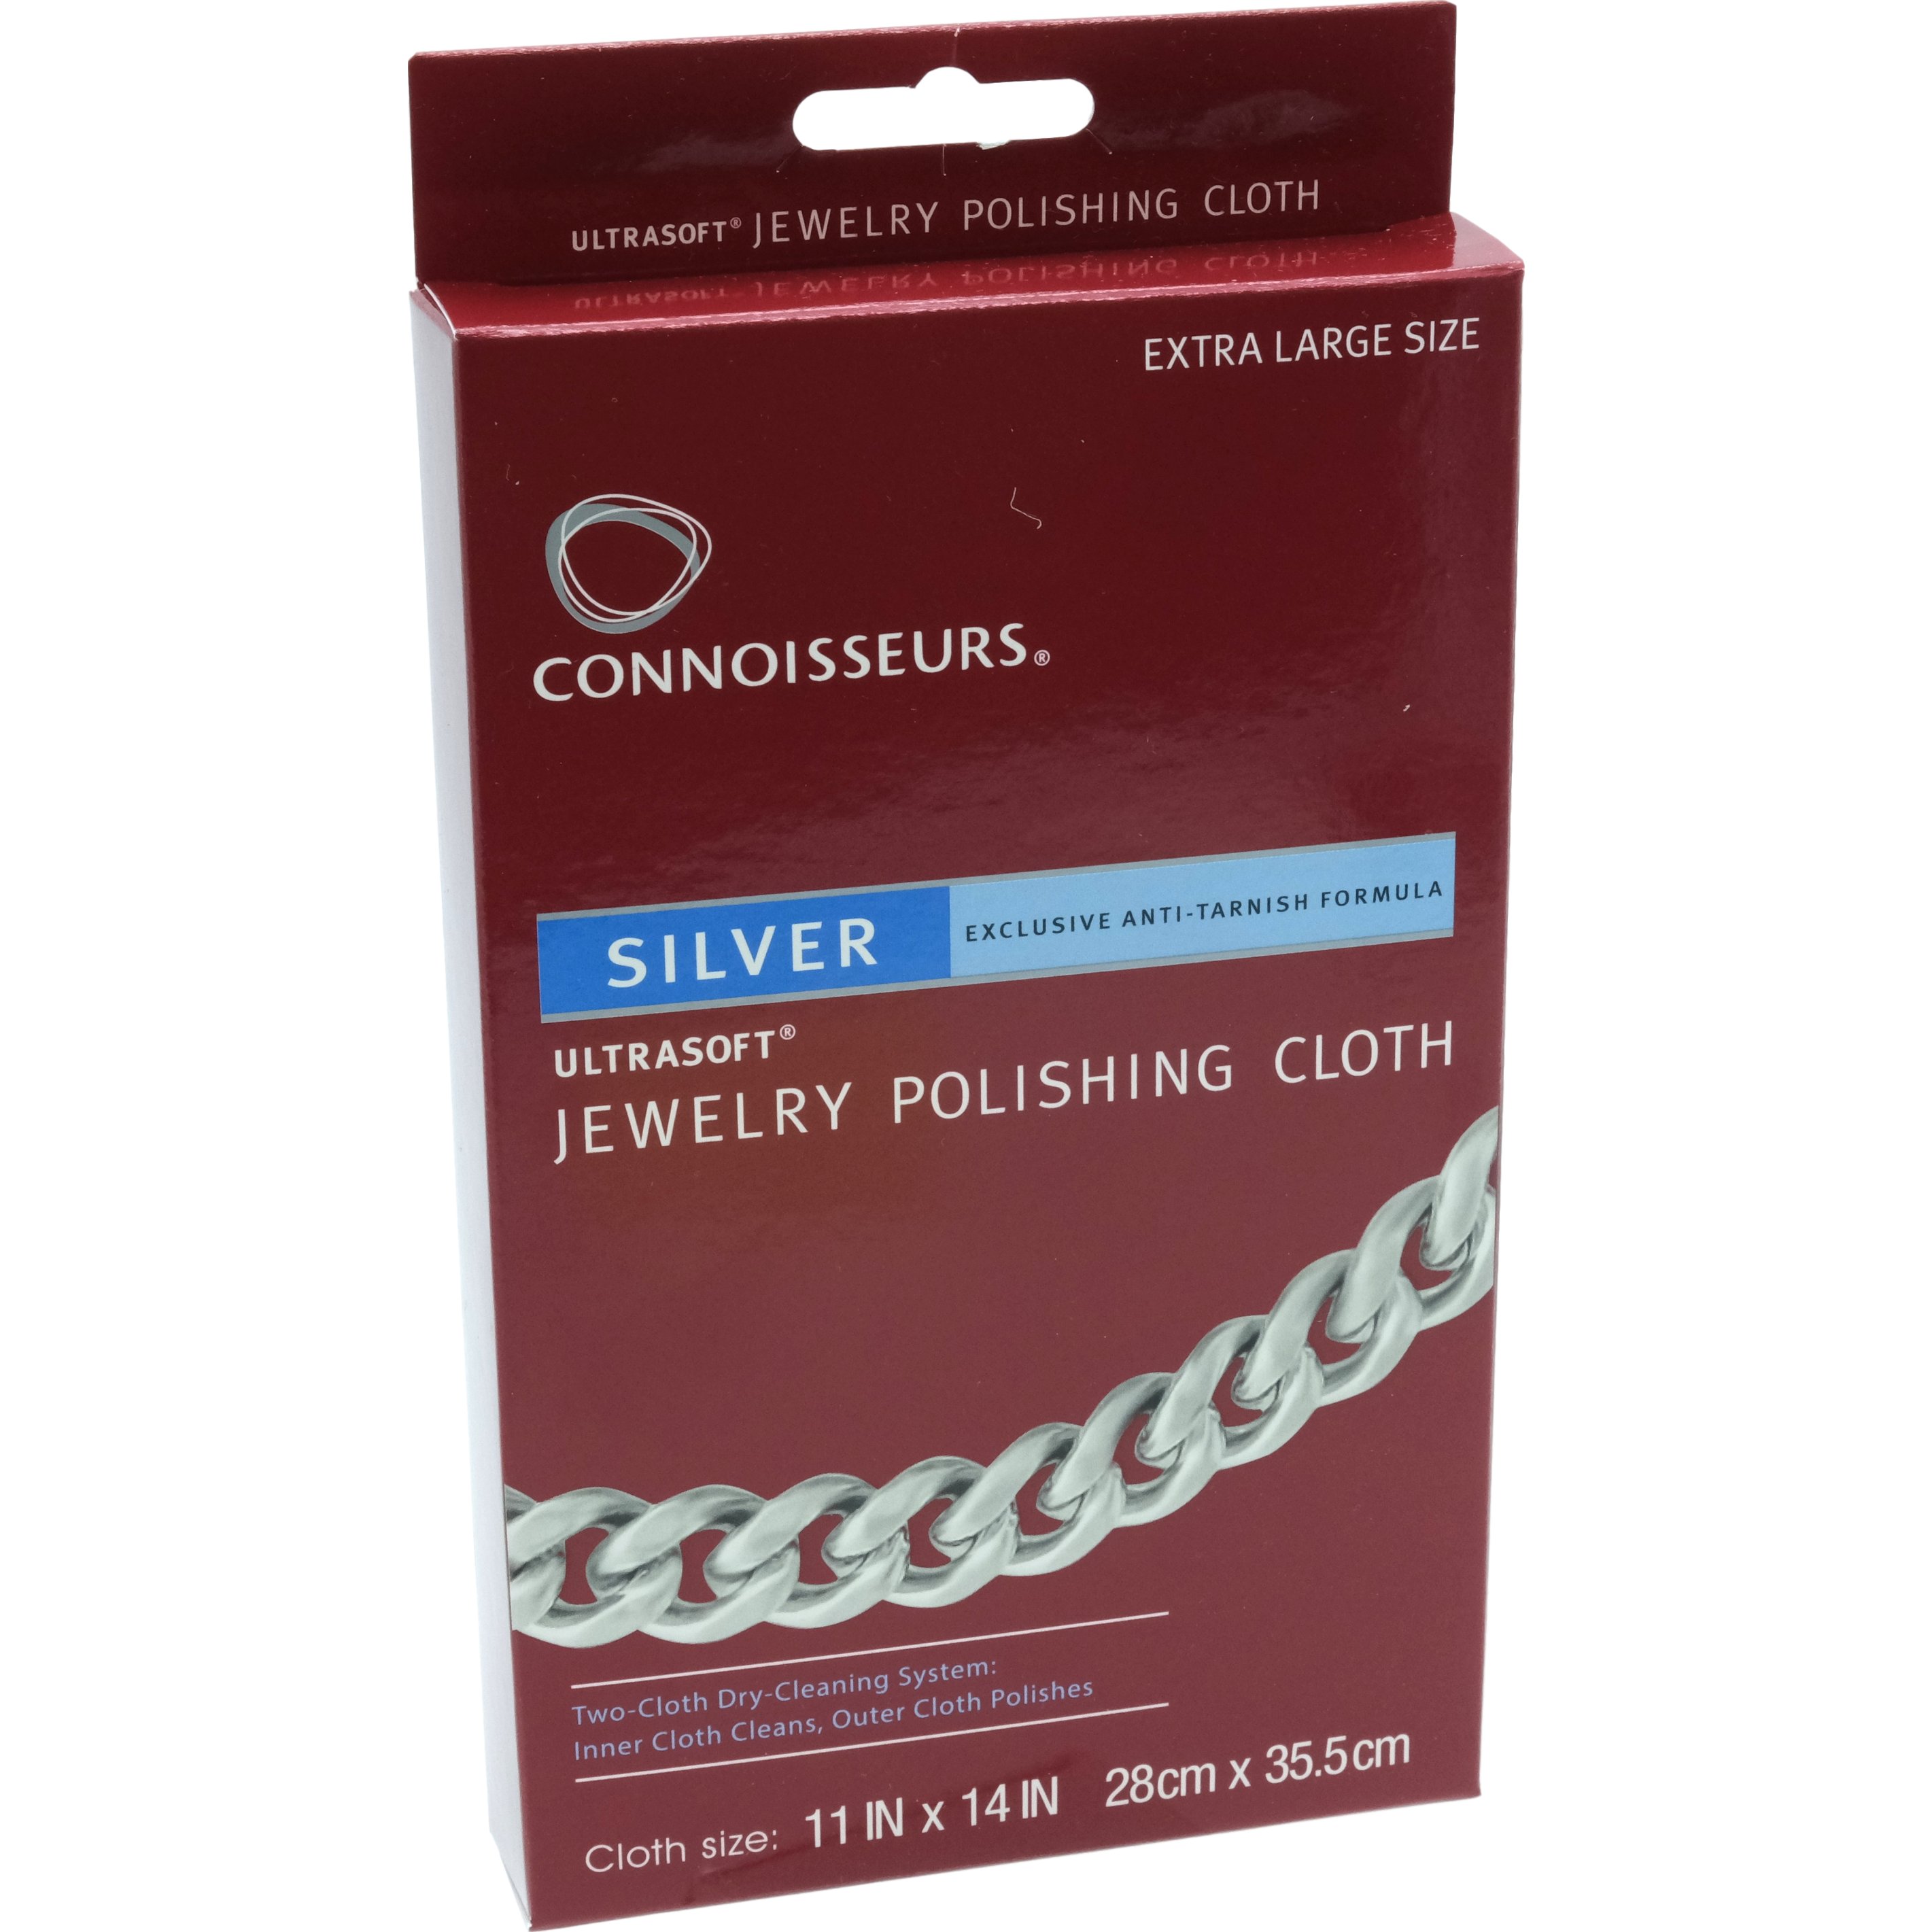 Findingking Connoisseurs Silver Jewelry Polishing Cloth 8" x 10" Ultra Soft Cleaner Box